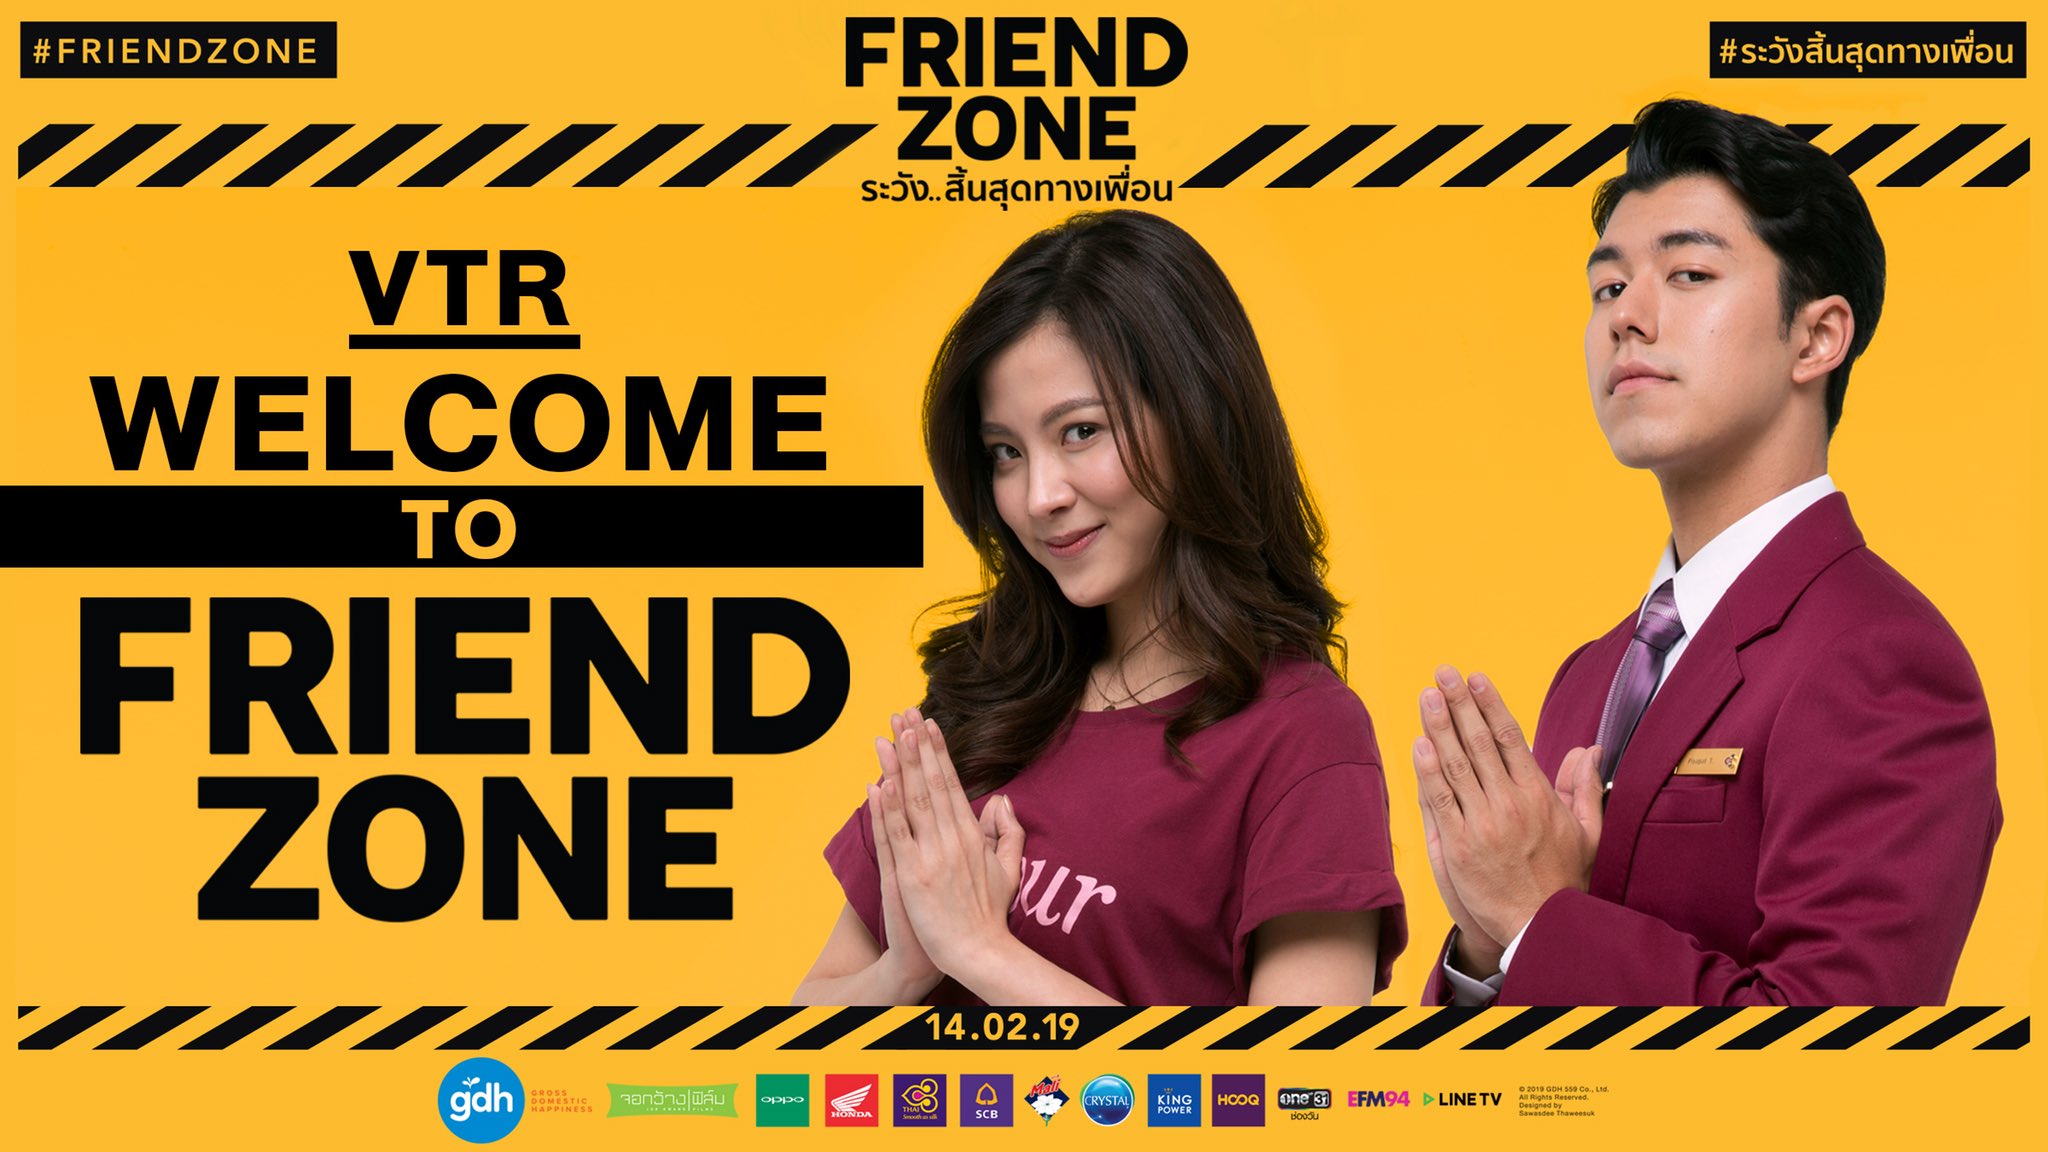 Friend Zone Poster 15: Full Size Poster Image